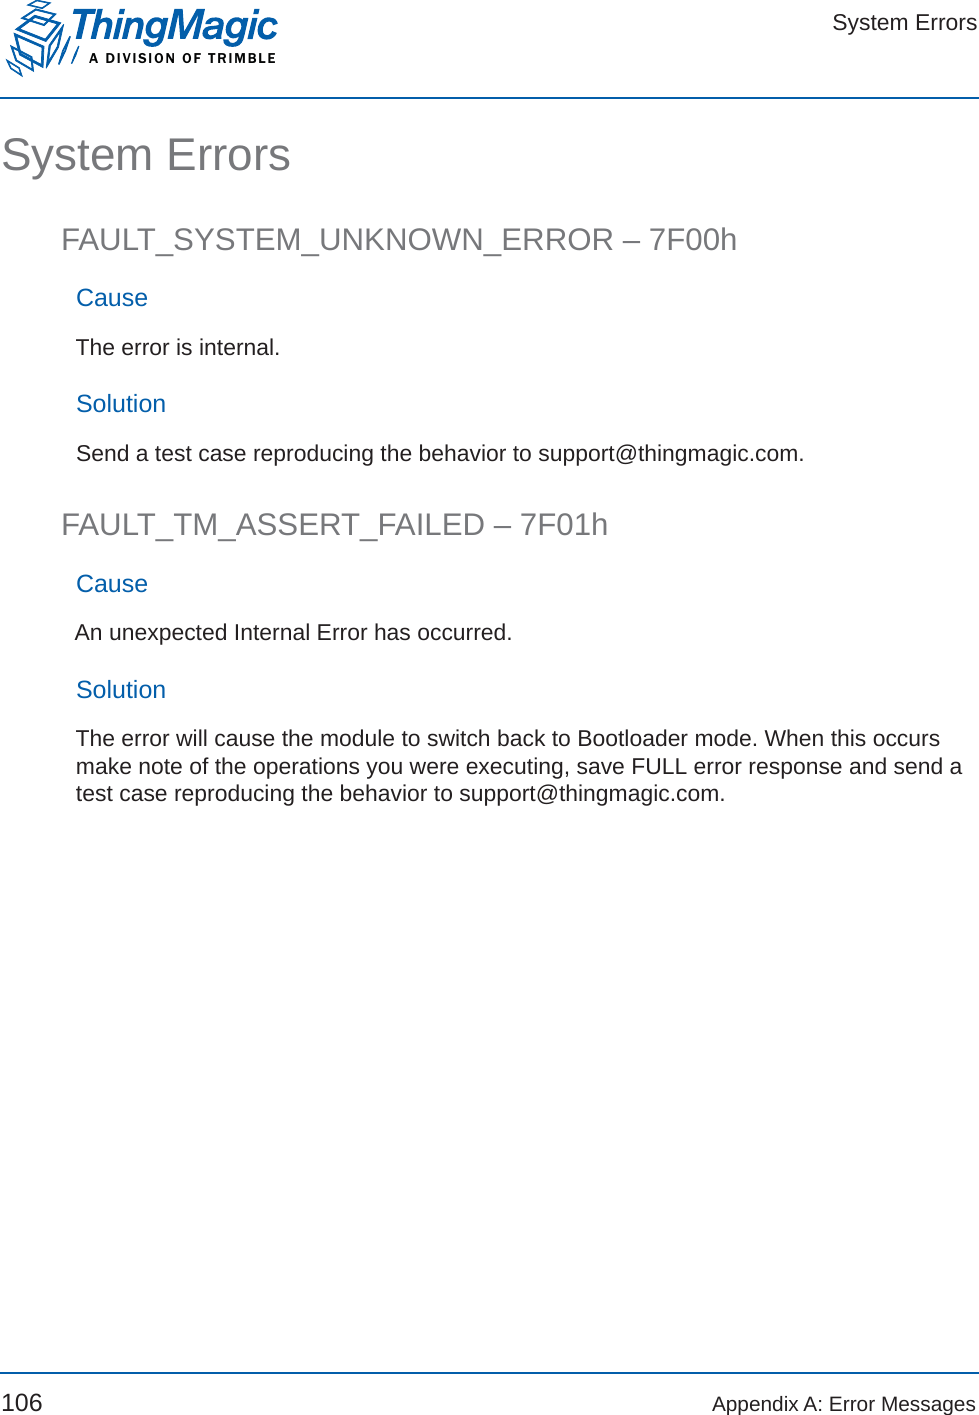 System ErrorsA DIVISION OF TRIMBLE106 Appendix A: Error MessagesSystem ErrorsFAULT_SYSTEM_UNKNOWN_ERROR – 7F00hCauseThe error is internal.SolutionSend a test case reproducing the behavior to support@thingmagic.com.FAULT_TM_ASSERT_FAILED – 7F01hCauseAn unexpected Internal Error has occurred.SolutionThe error will cause the module to switch back to Bootloader mode. When this occurs make note of the operations you were executing, save FULL error response and send a test case reproducing the behavior to support@thingmagic.com.